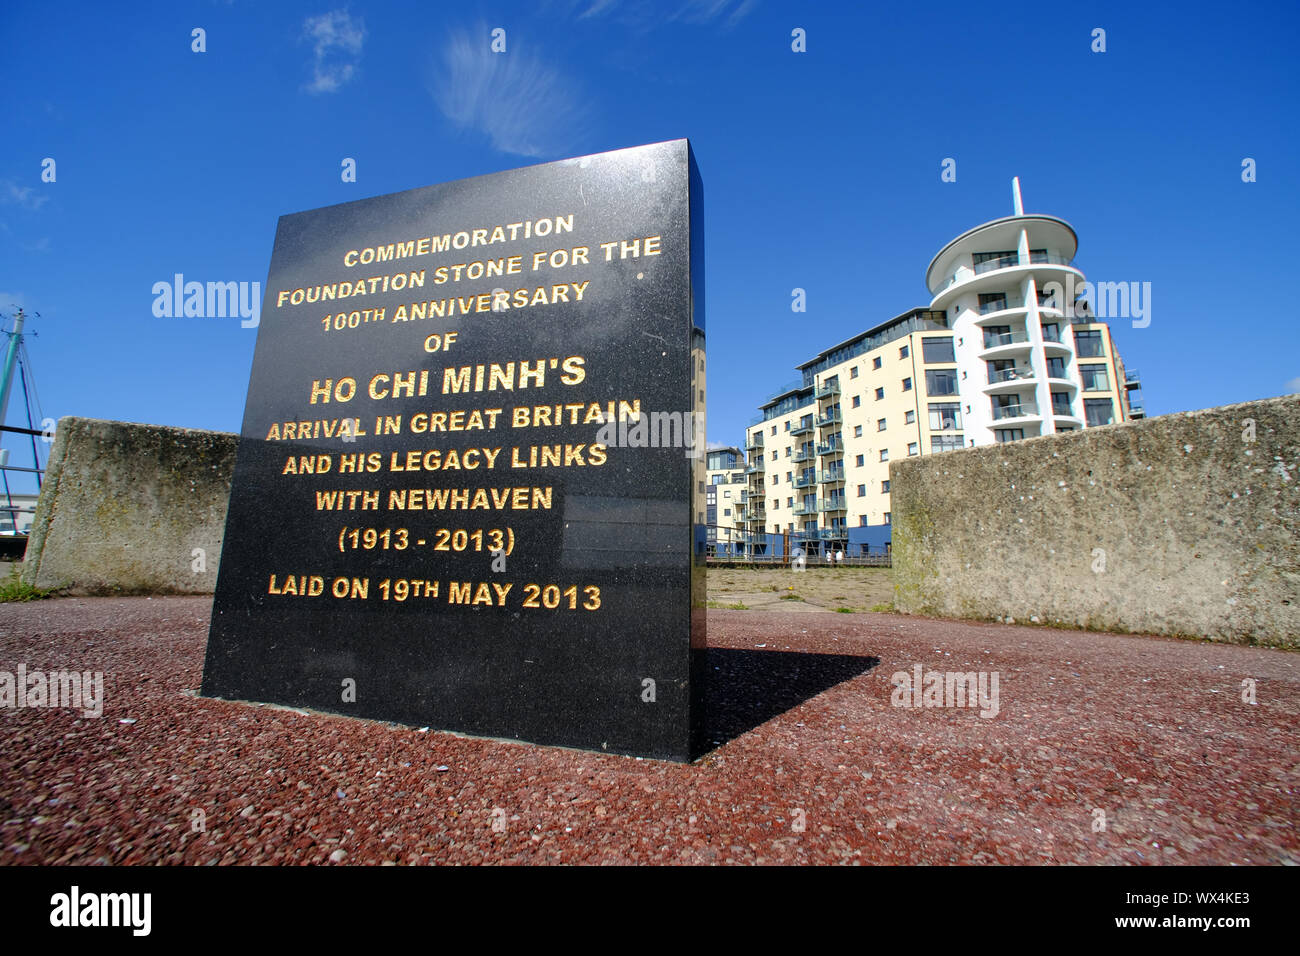 Commemorative stone for Ho Chi Minh's 100th anniversary arrival in Britain. Newhaven, East Sussex, UK Stock Photo